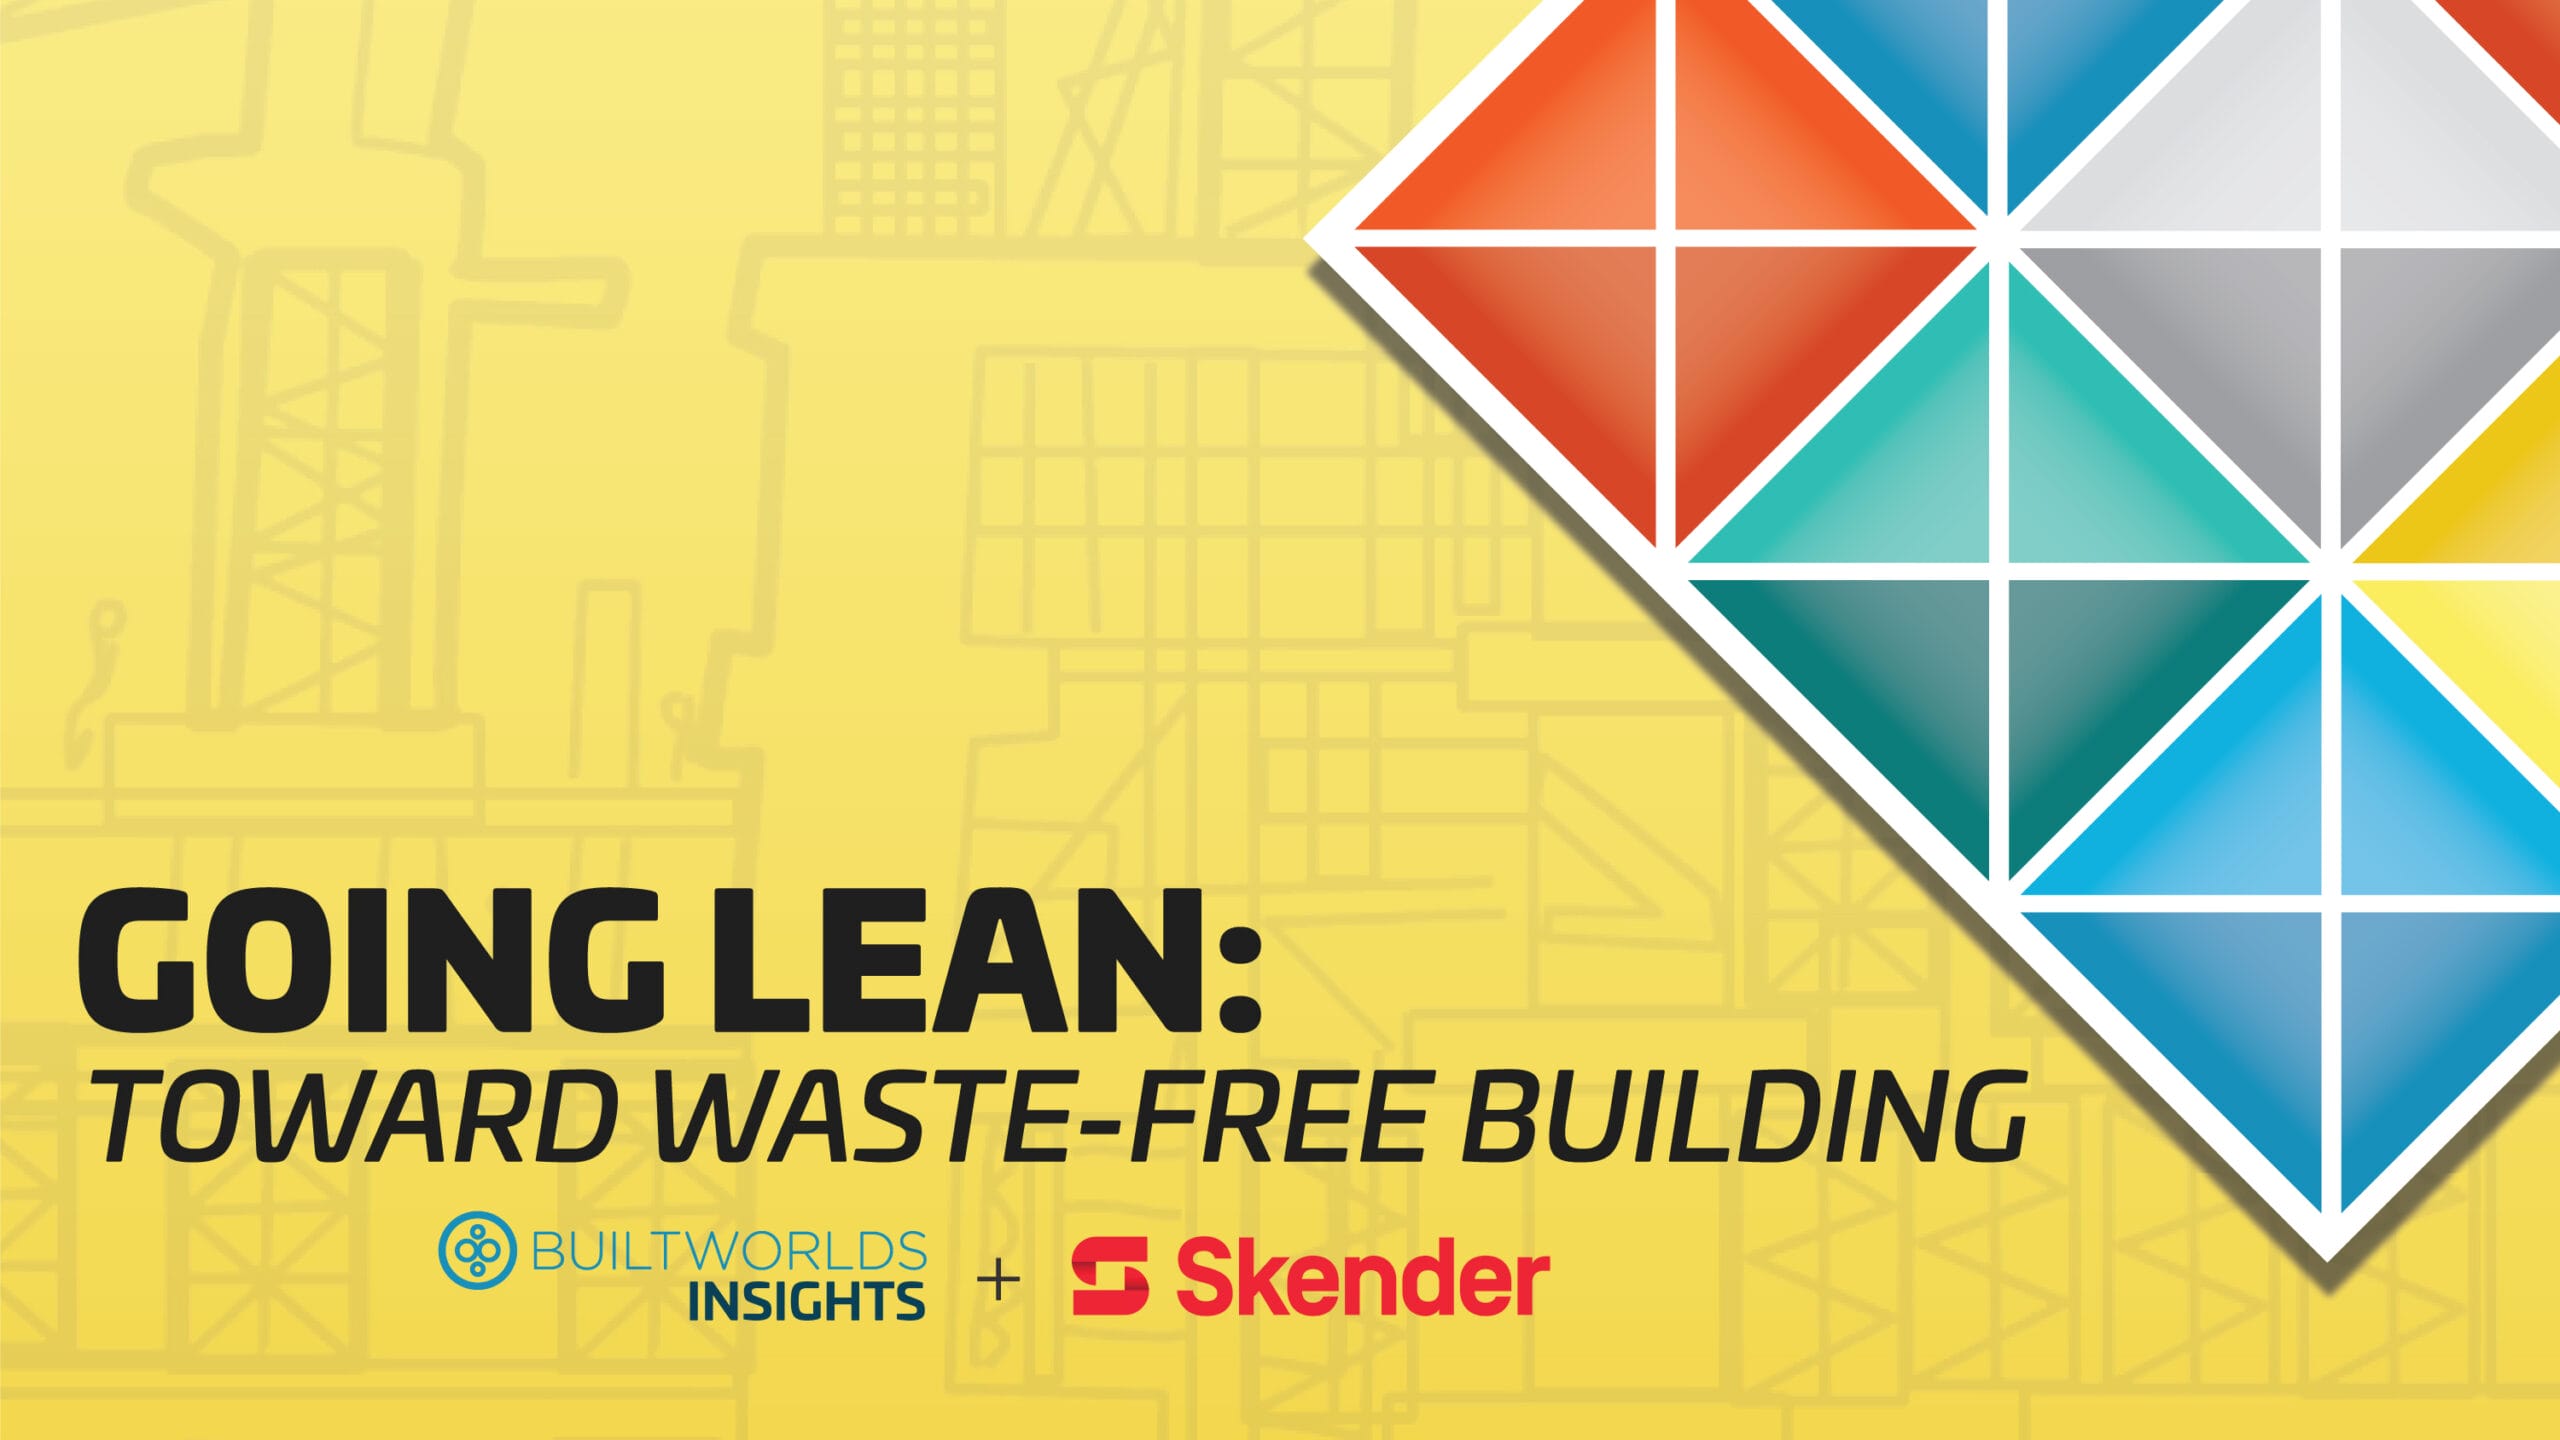 Skender and BuiltWorlds Release “Going Lean: Toward Waste-free Building” Report